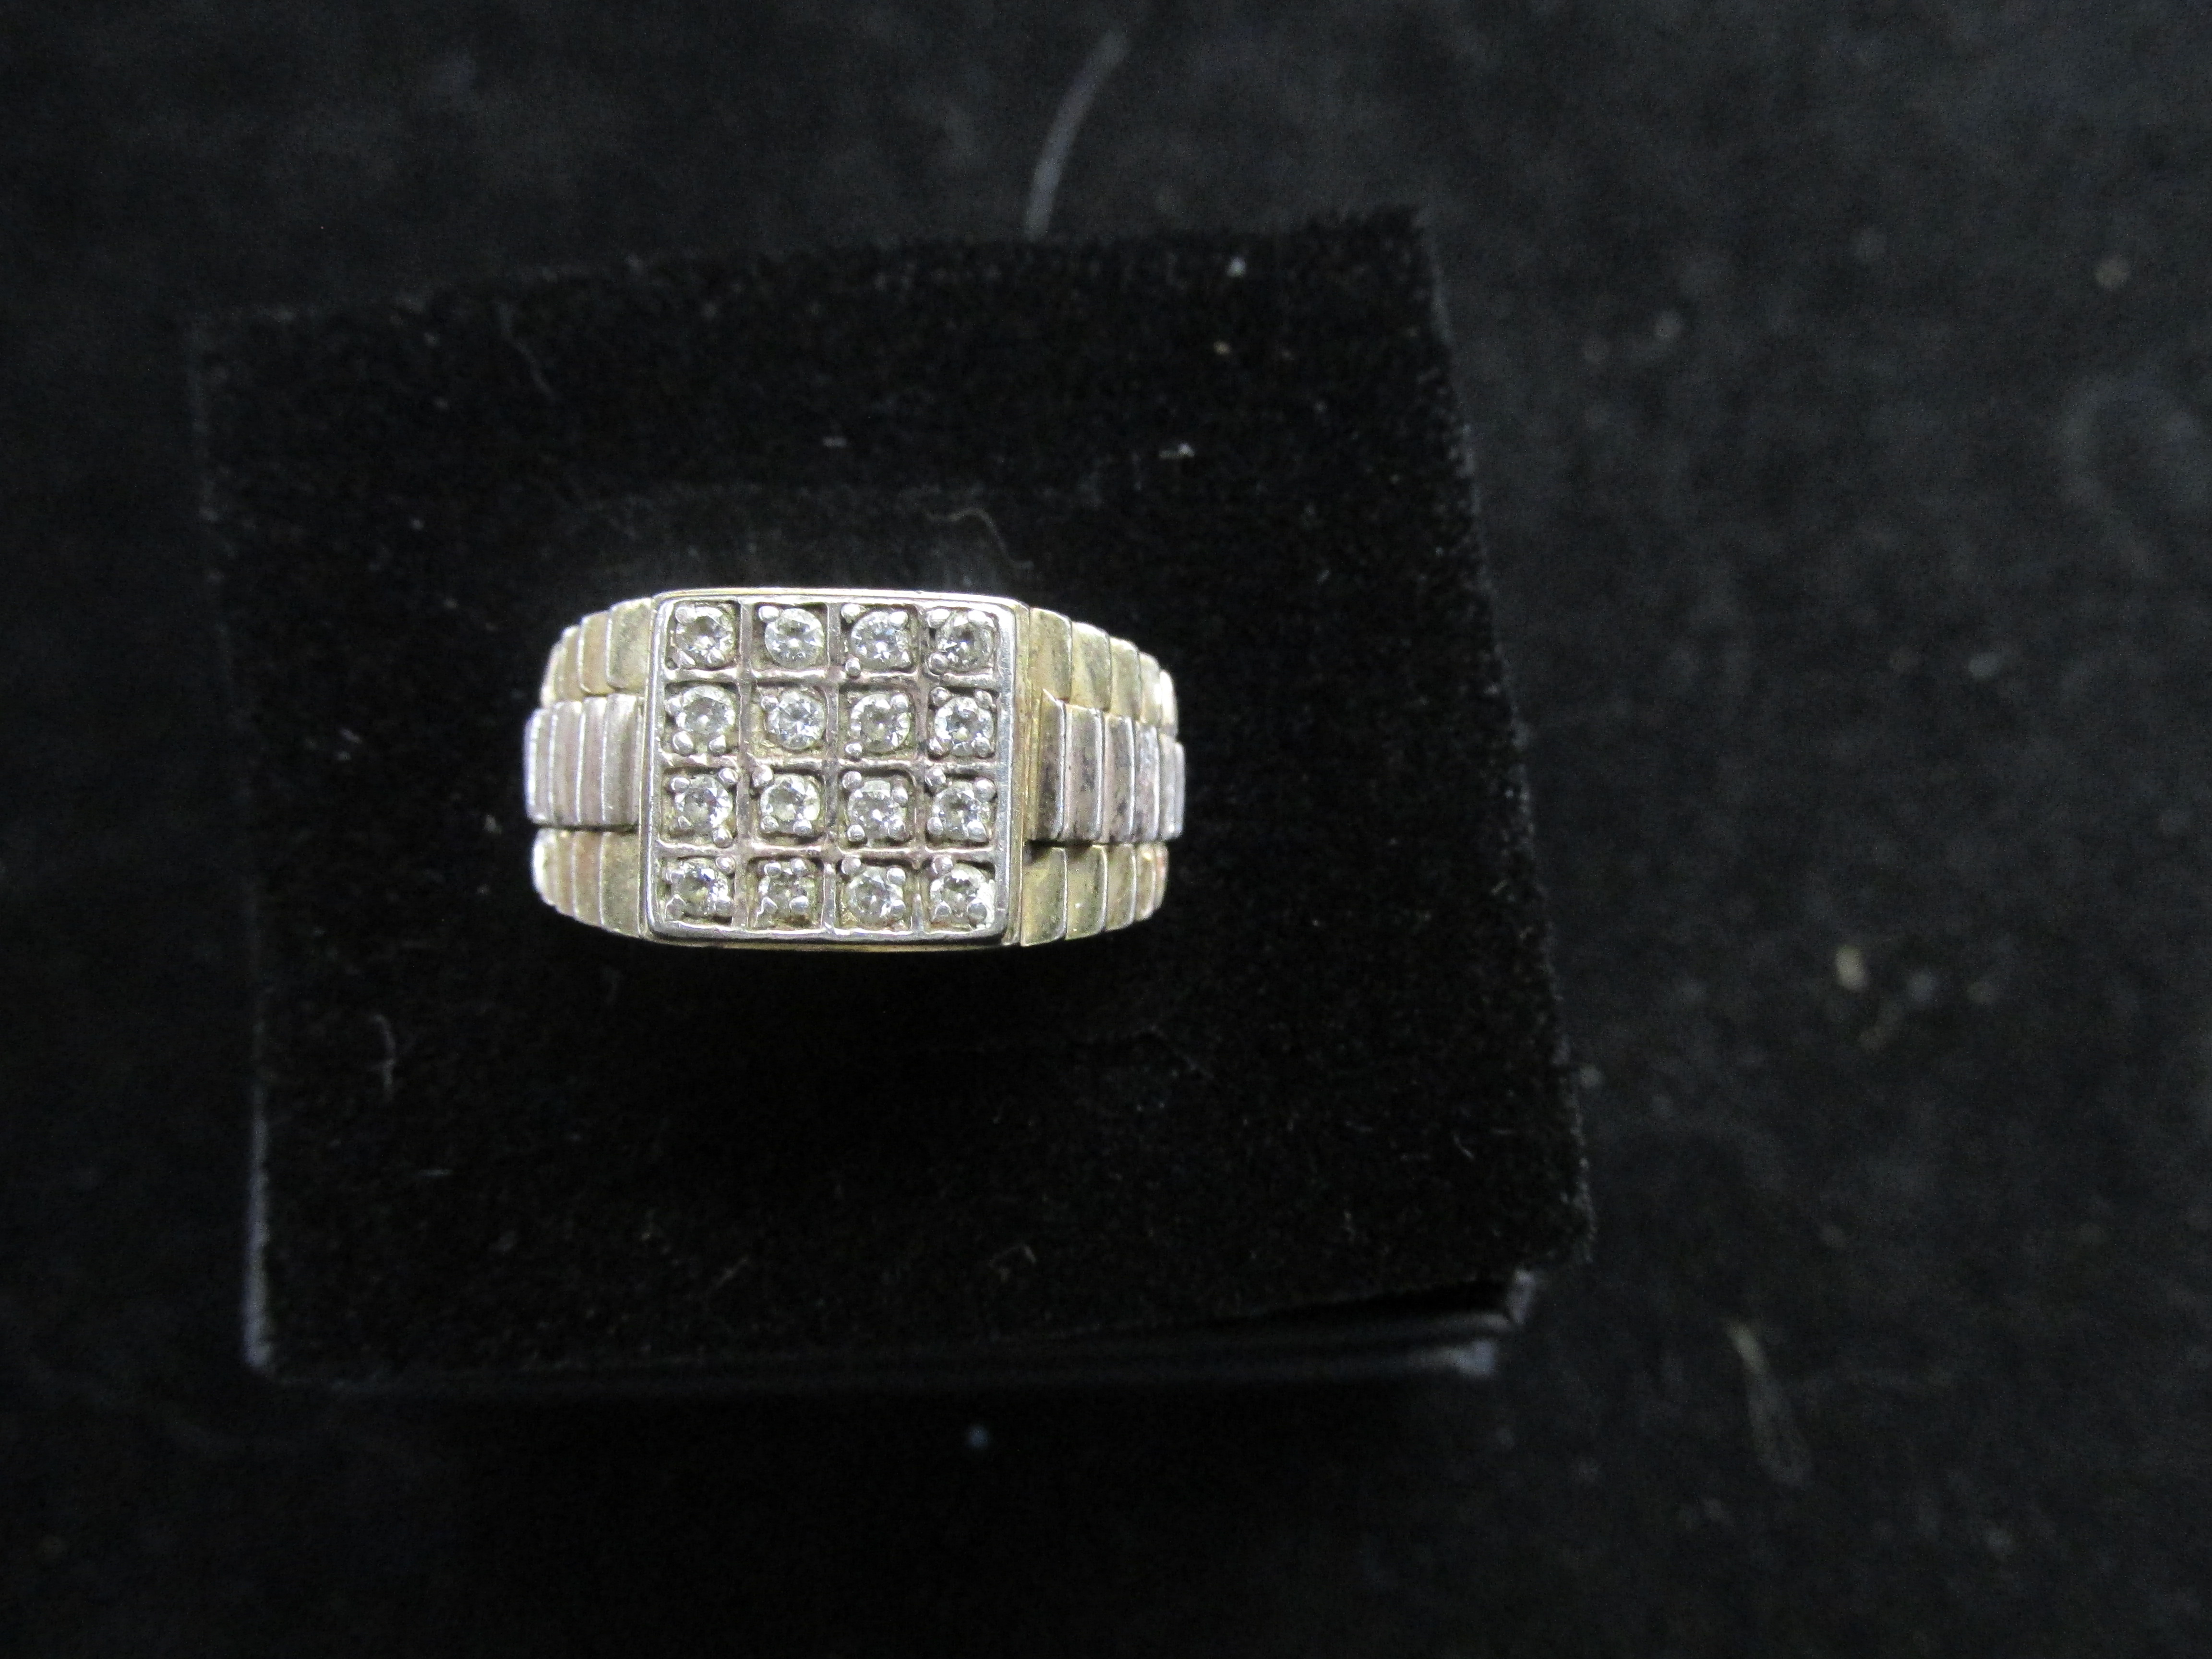 Silver gilt gents pinky ring